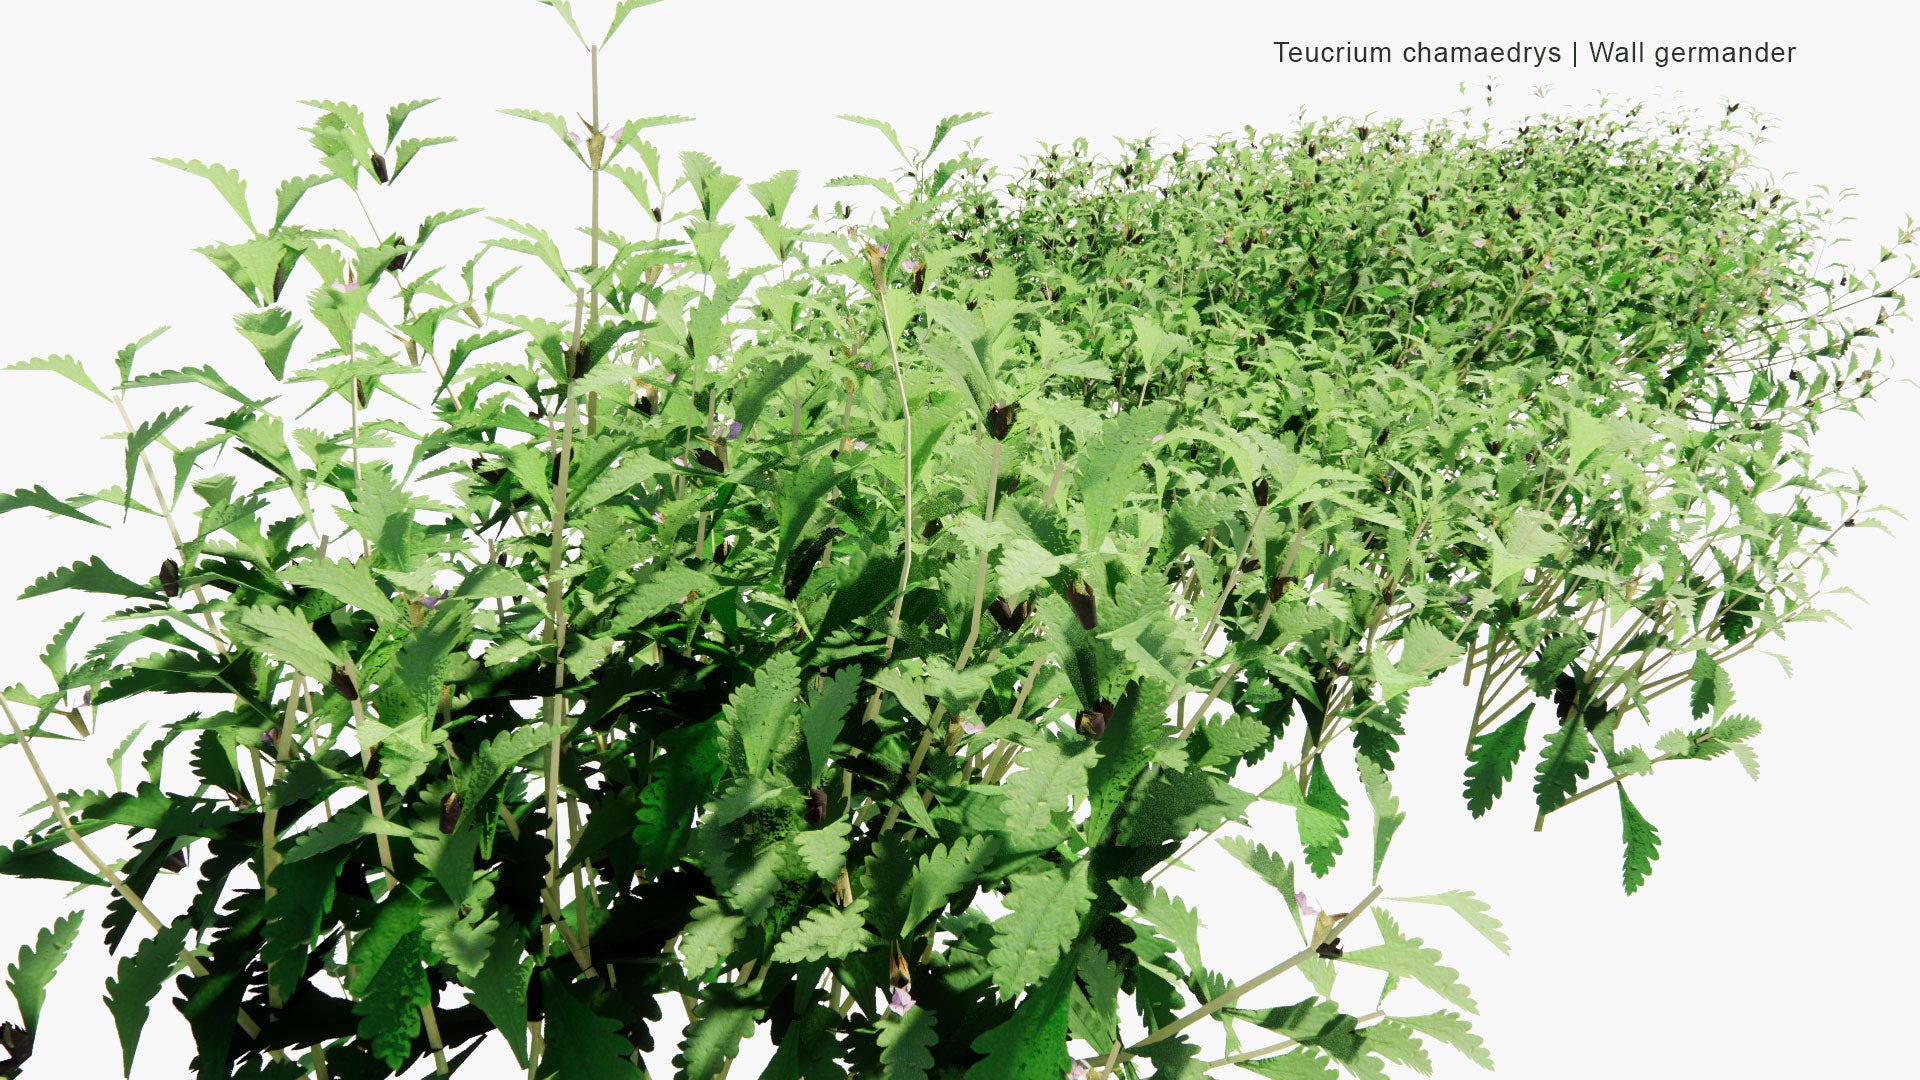 Low Poly Teucrium Chamaedrys - Wall Germander (3D Model)